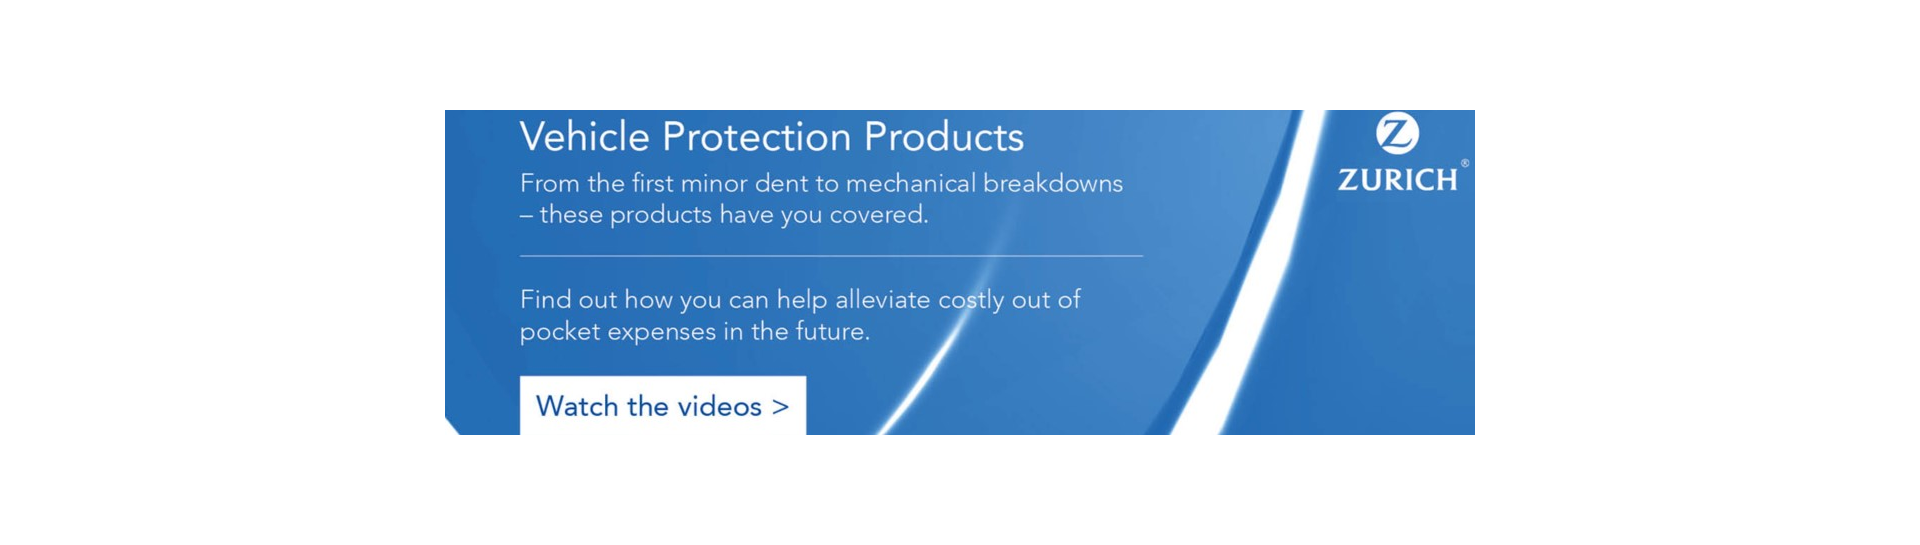 Vehicle Protection Products.png